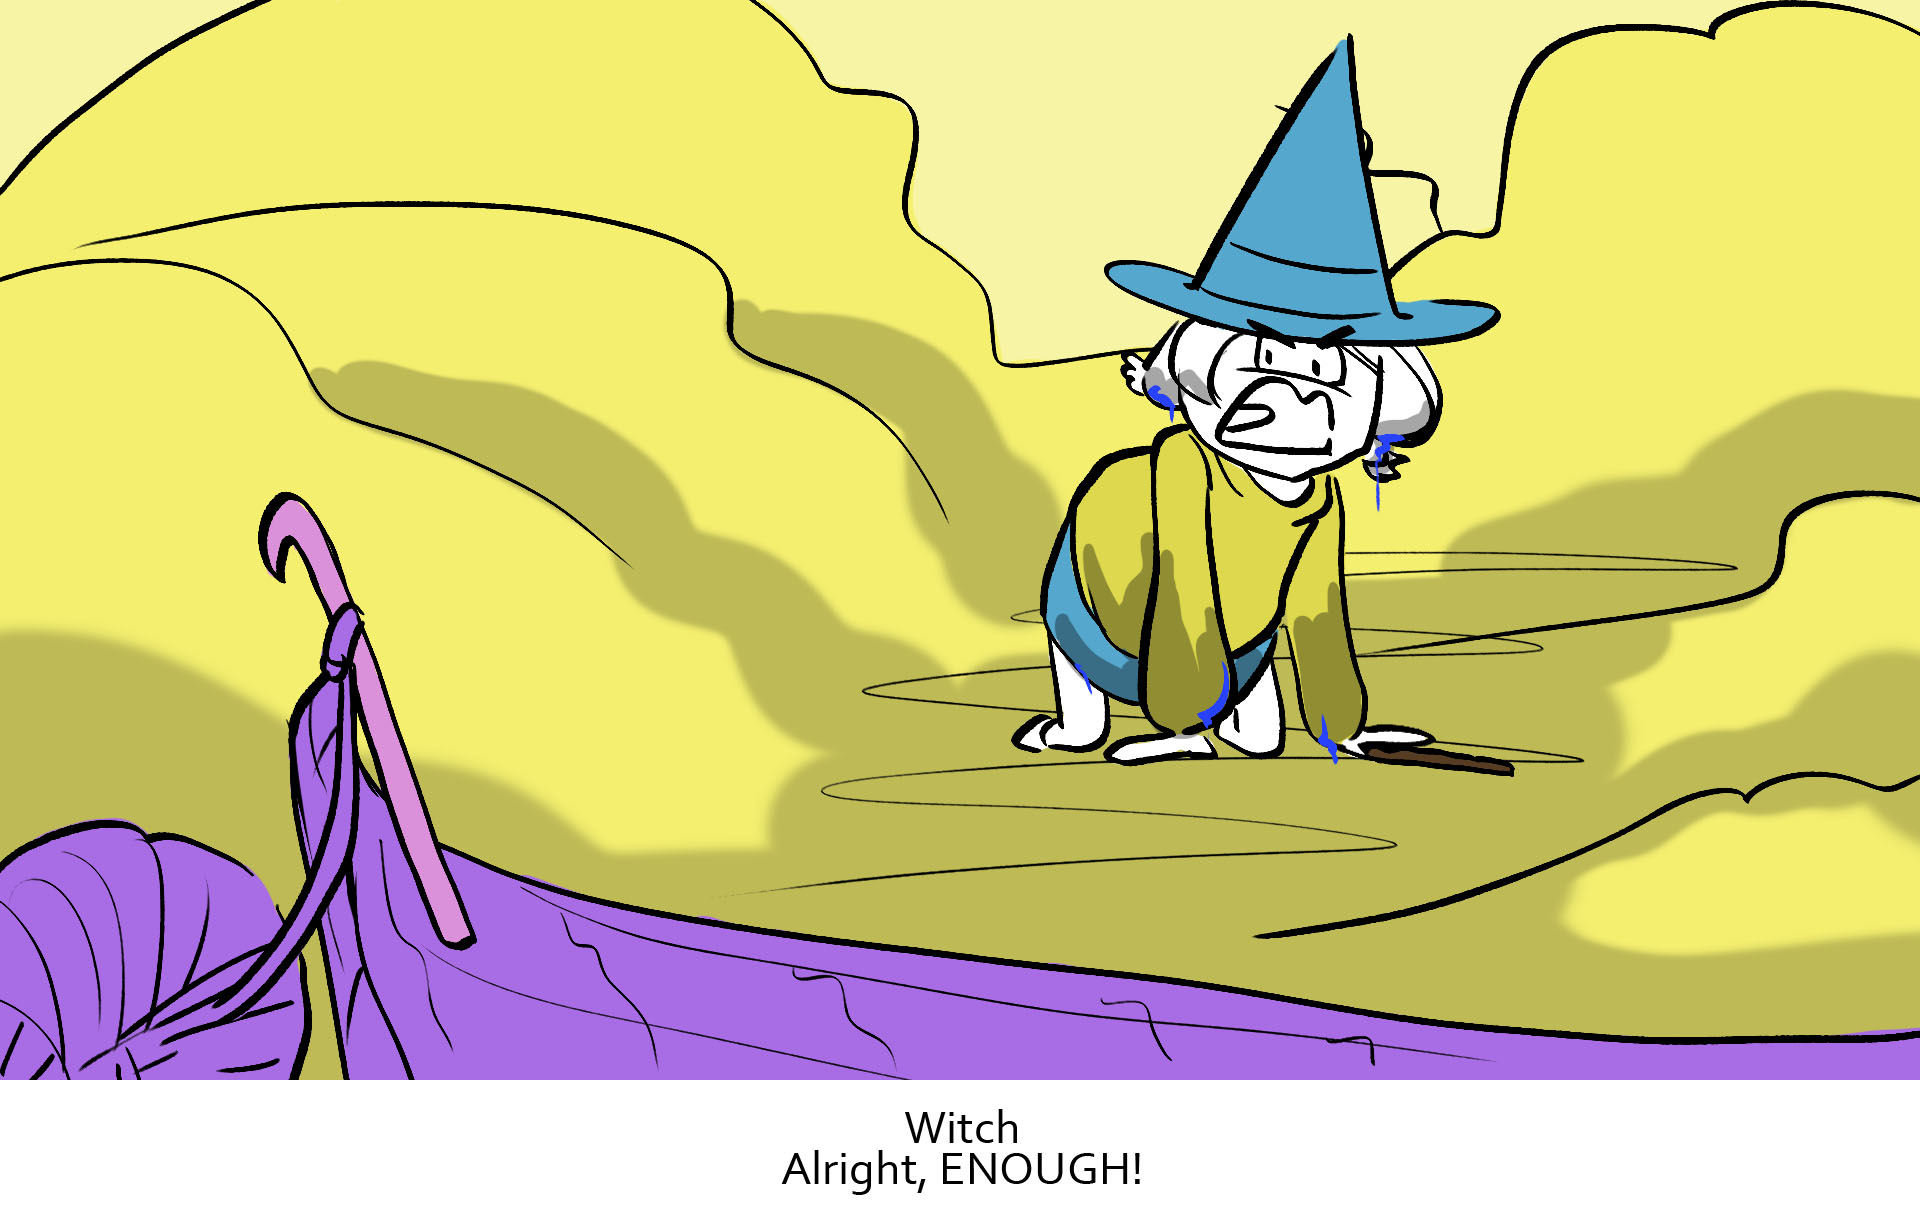 CrochetWitch_wDialogue_0138_Witch Alright, ENOUGH!.jpg